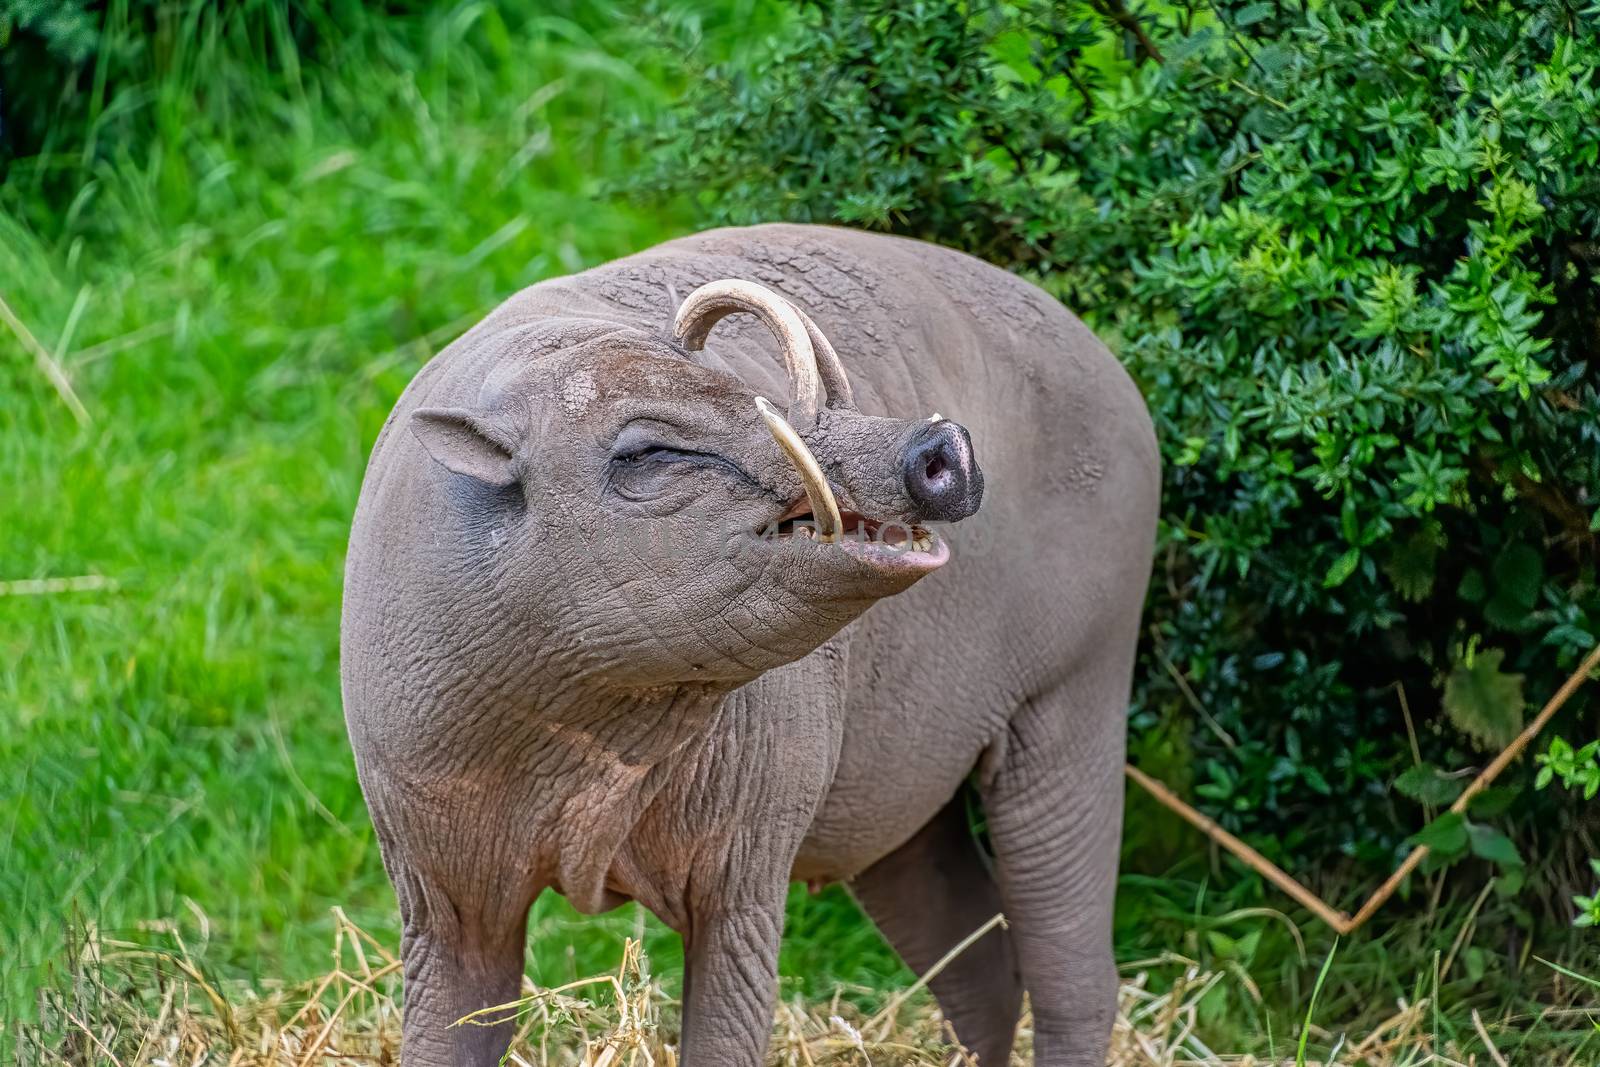 Babirusa -  means pig deer after their unusual appearance!